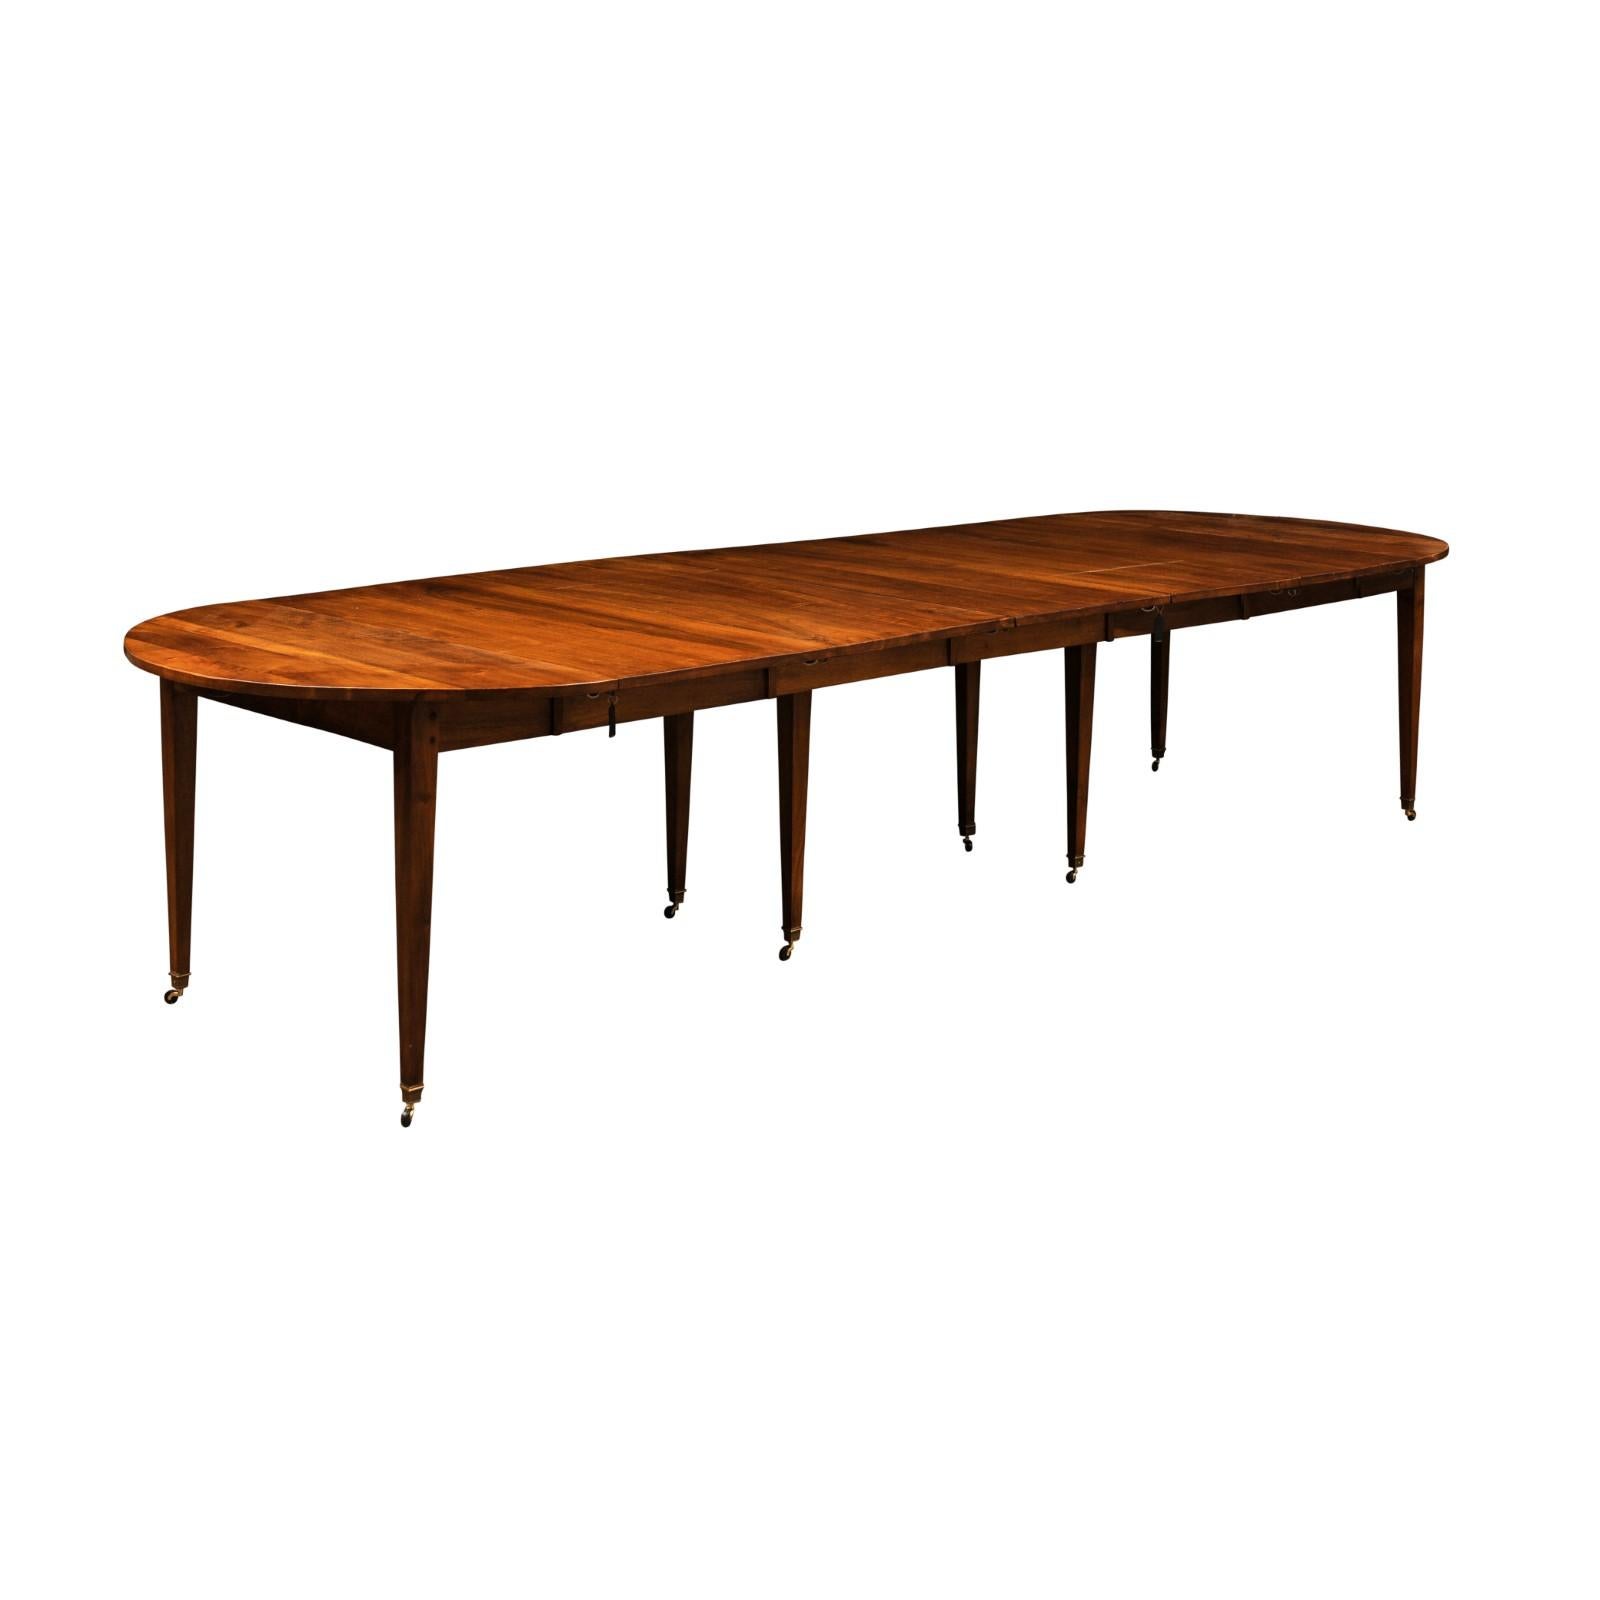 French 19th century walnut extension table with five leaves circa 1890
Leaves:19.25